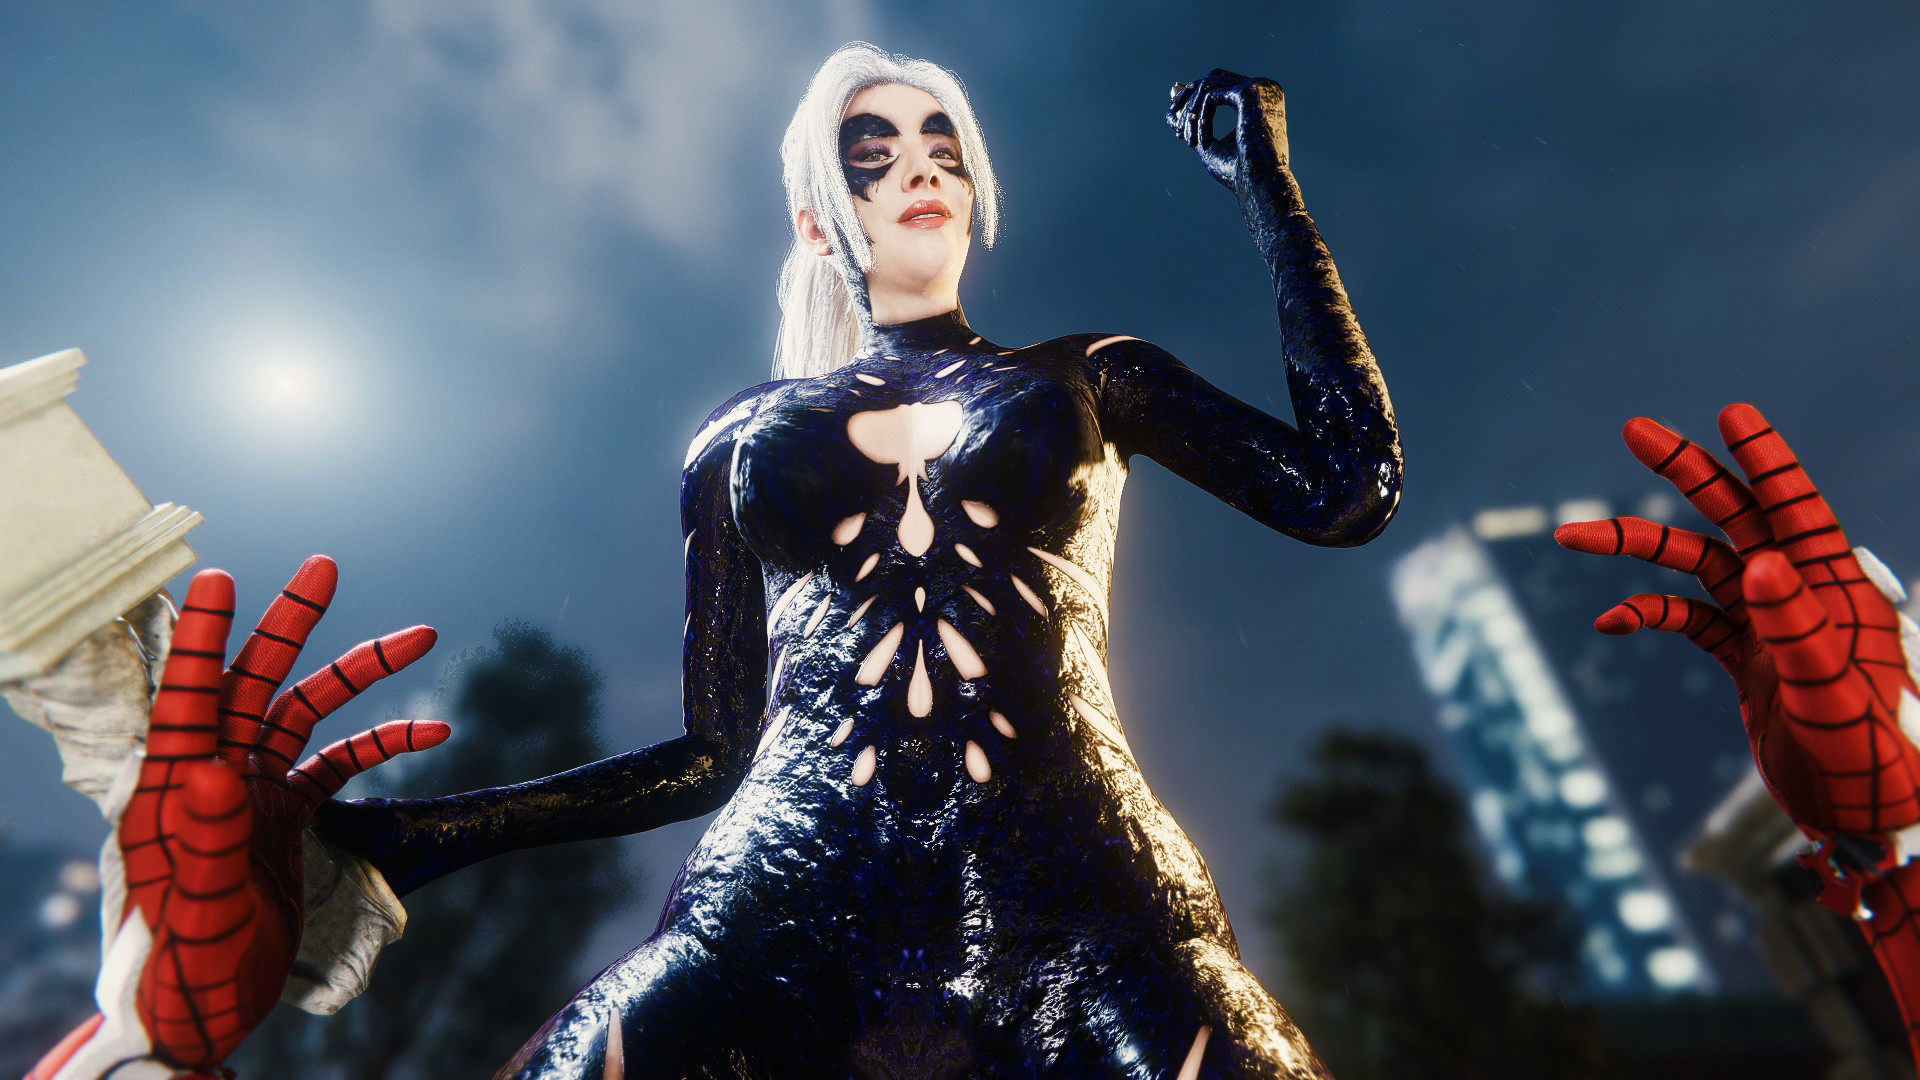 Black Cats New Suit Spider Man Remastered Mods Curseforge